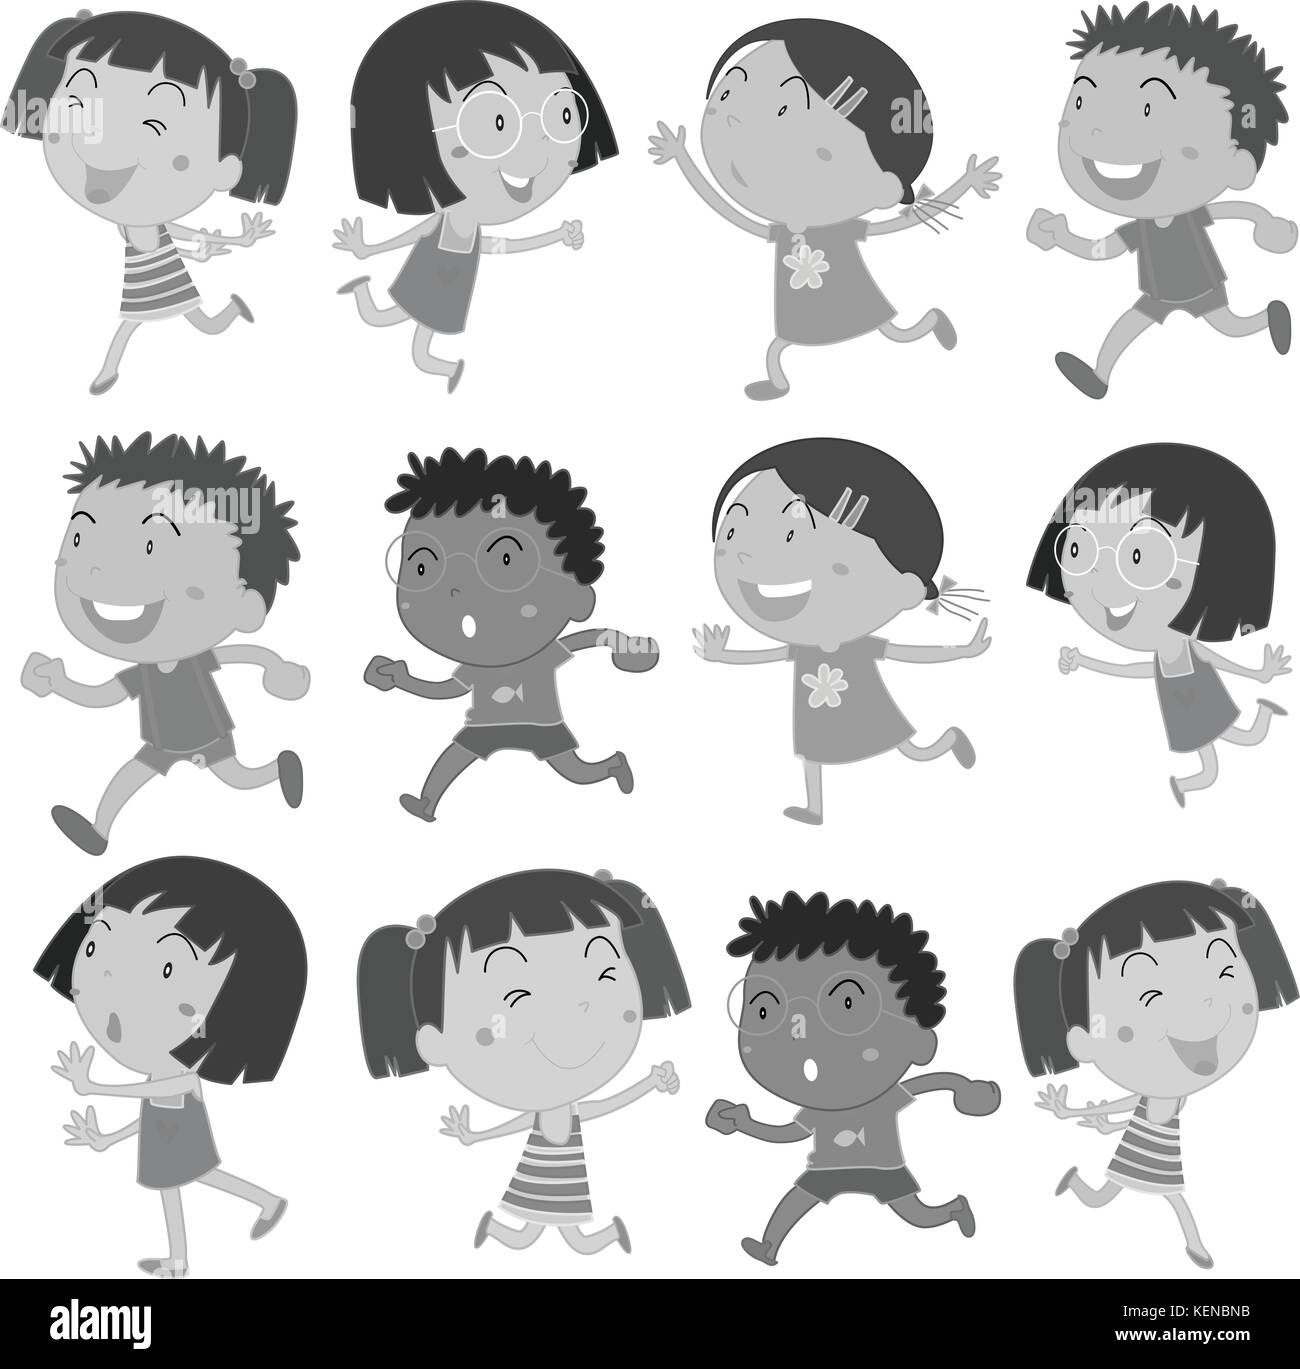 Illustration of boys and girls movements Stock Vector